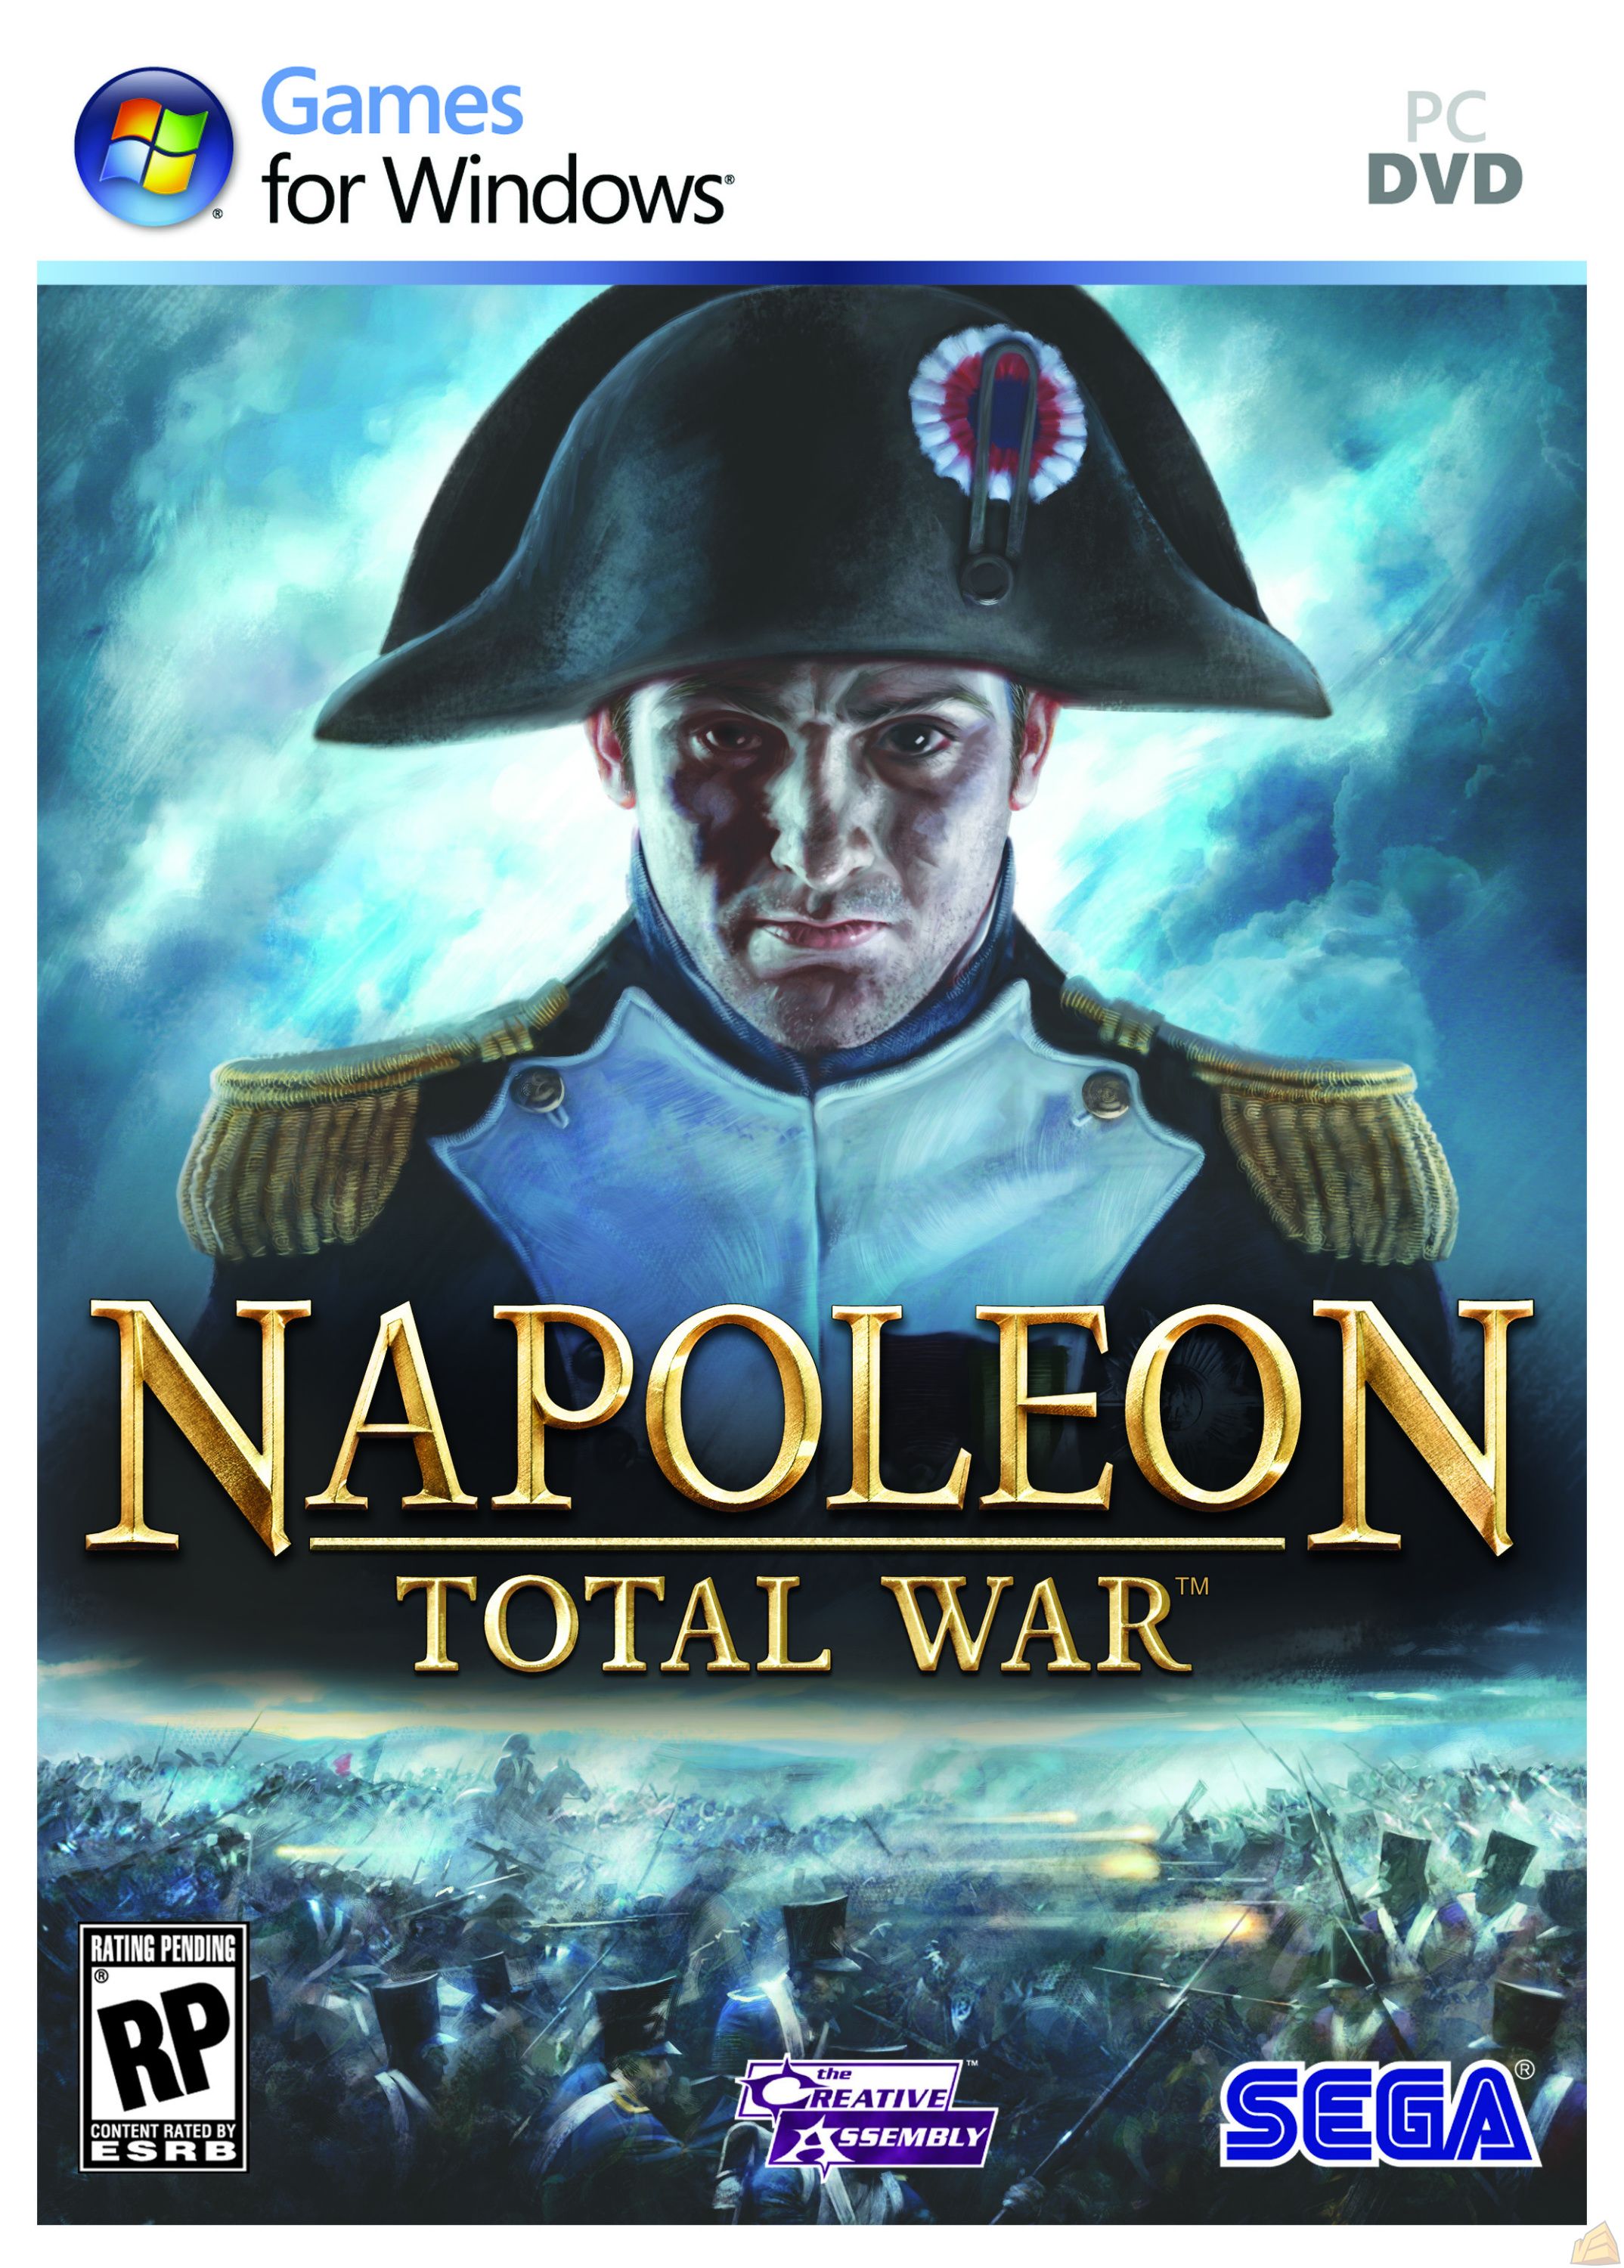 empire total war games for windowsissues